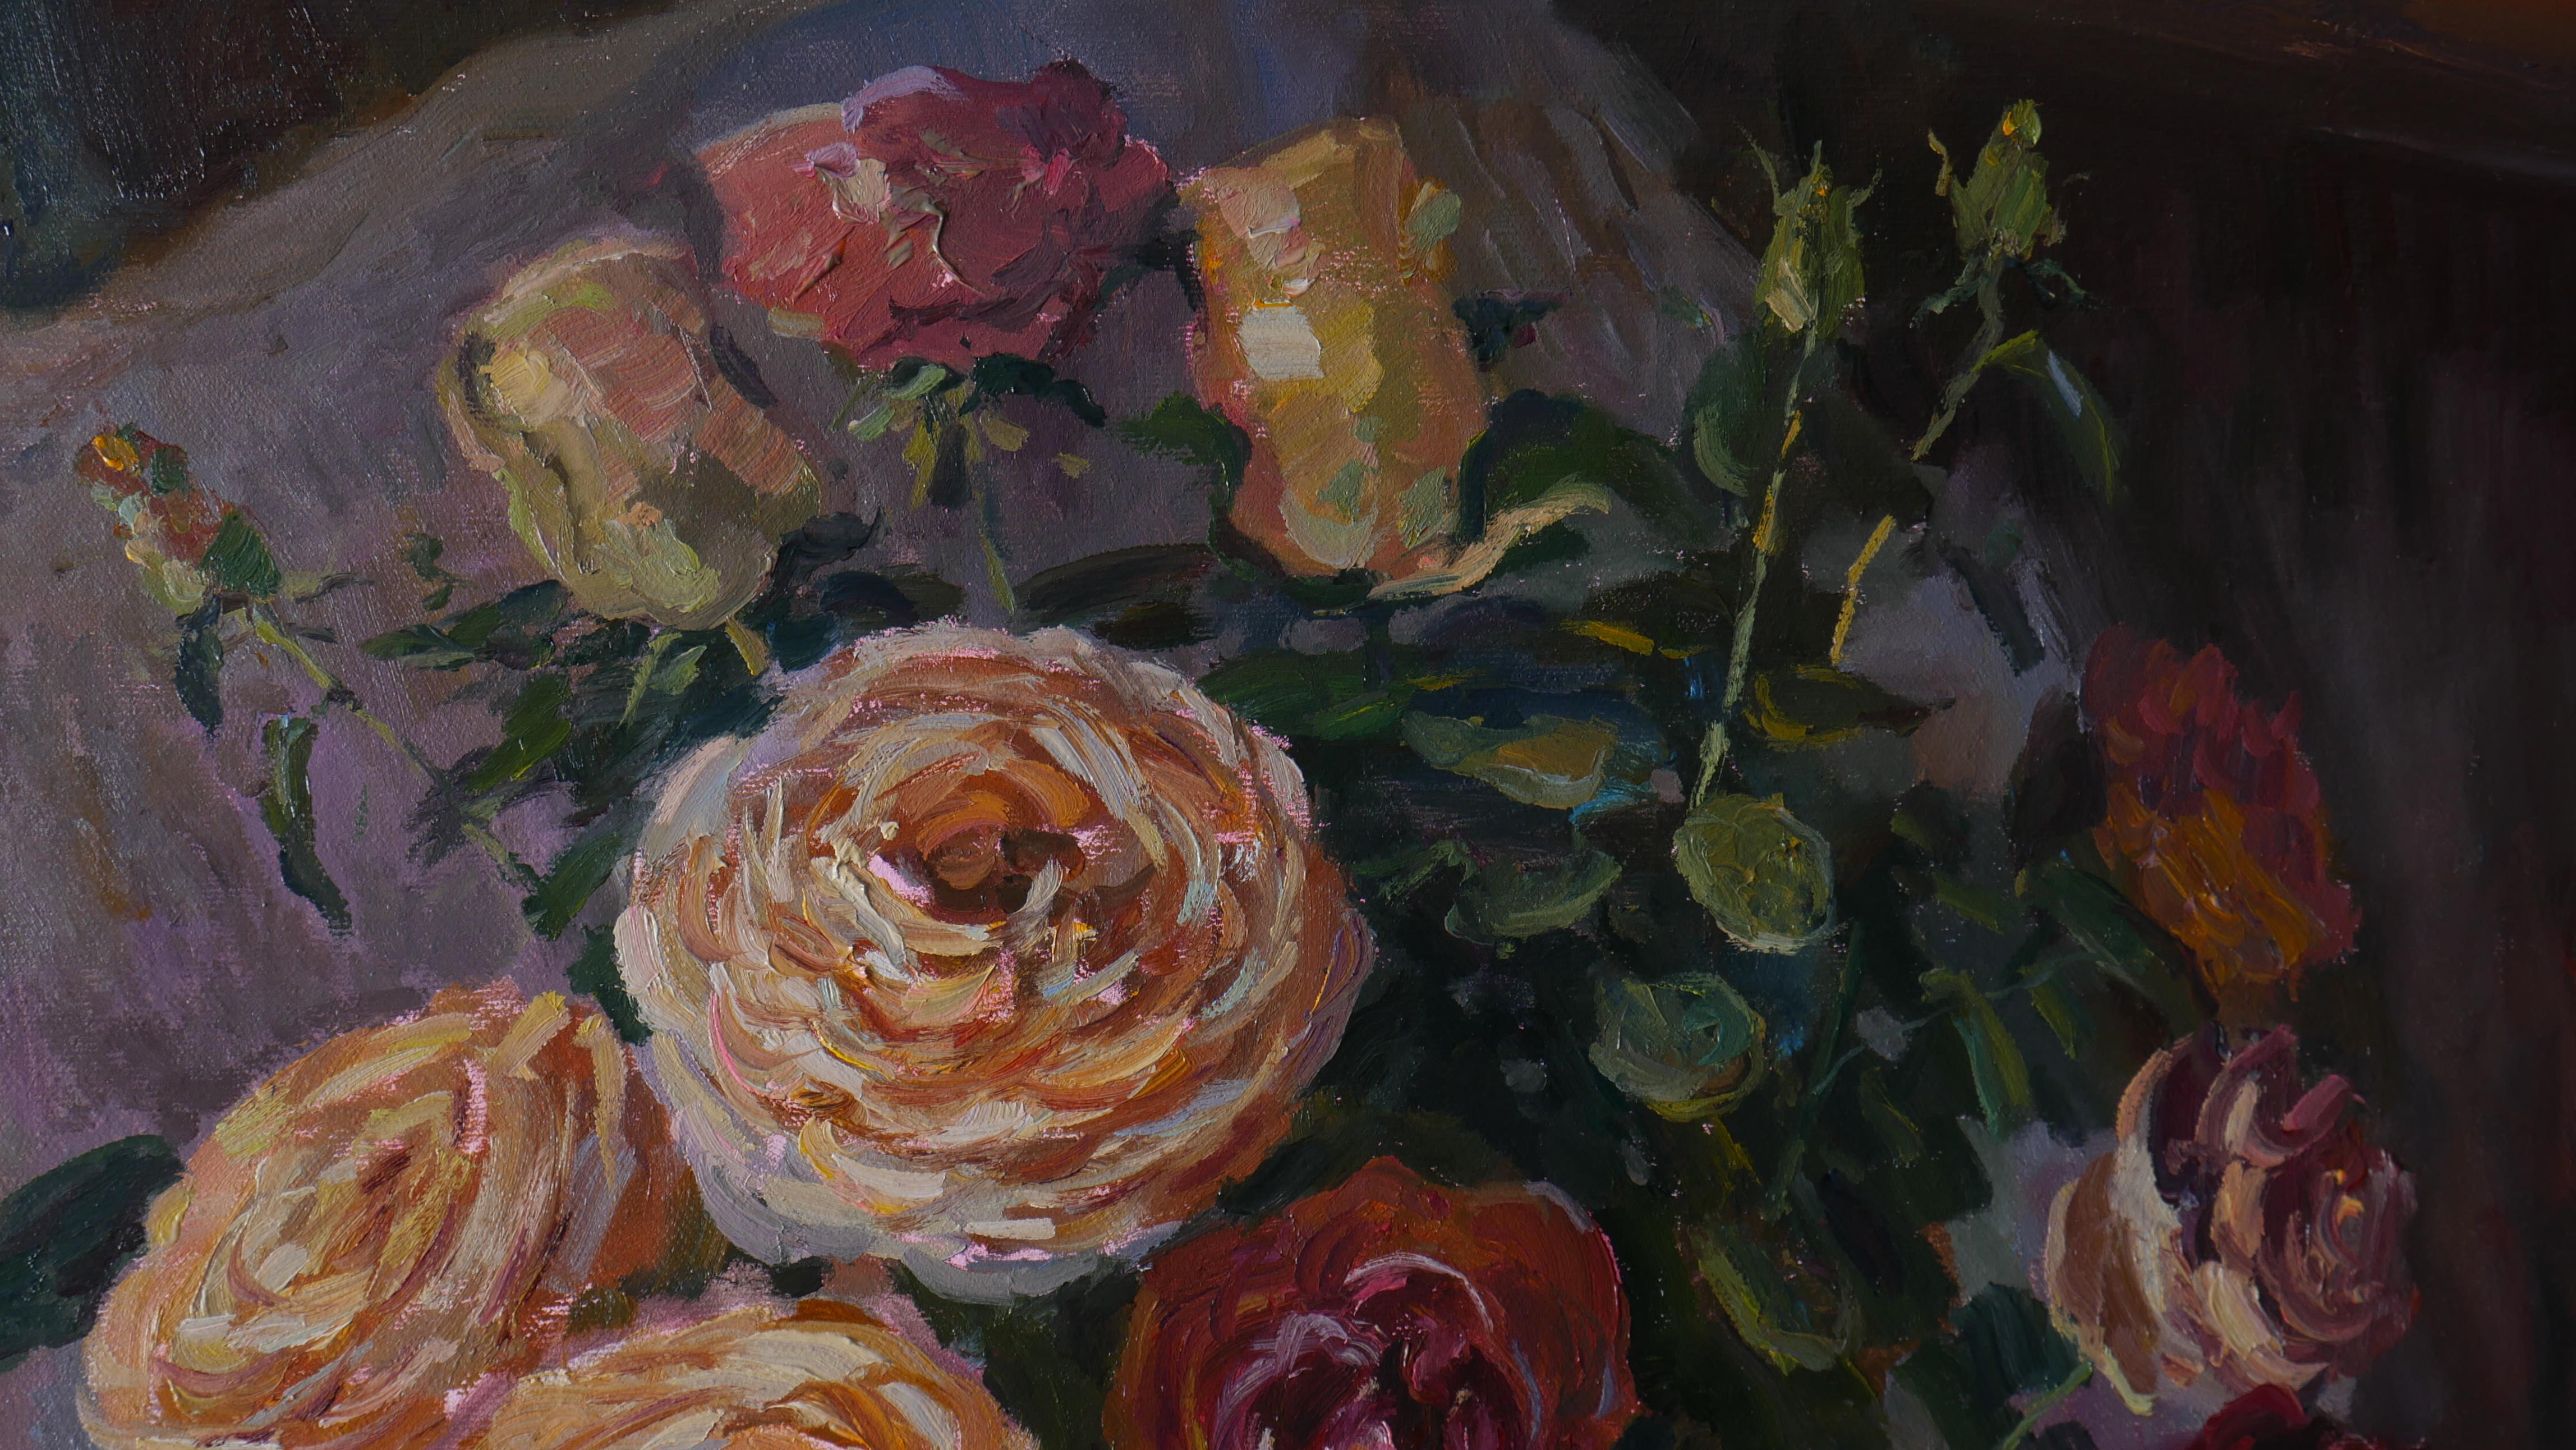 Morning Bouquet Of Roses - floral still life painting For Sale 1